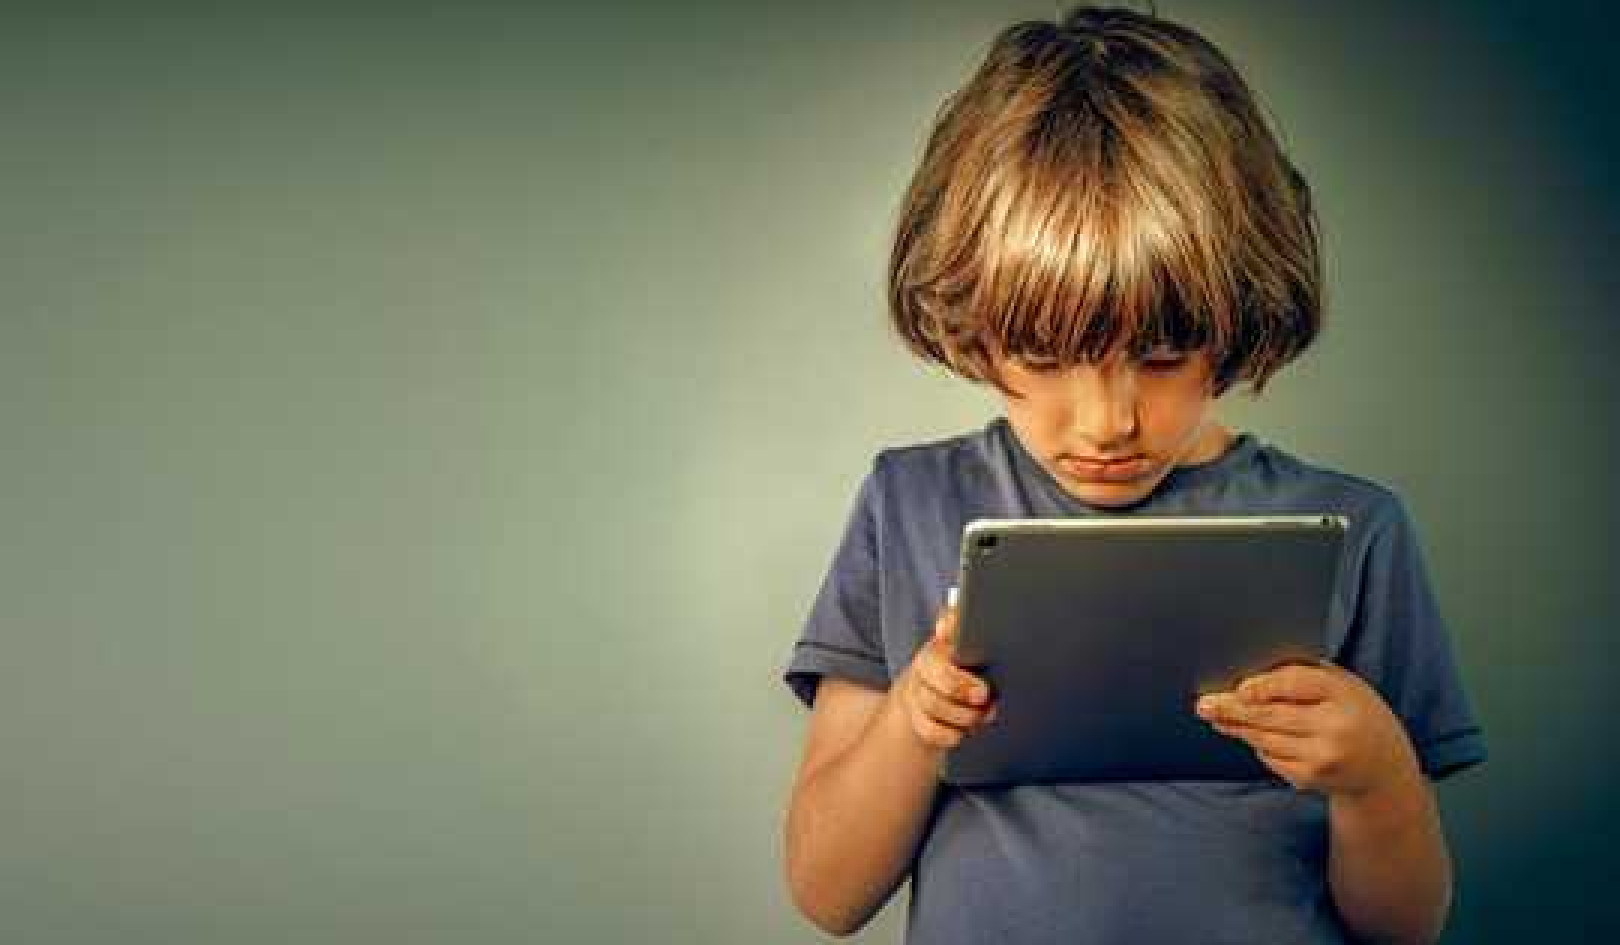 Why We Need To Data-Proof Our Kids